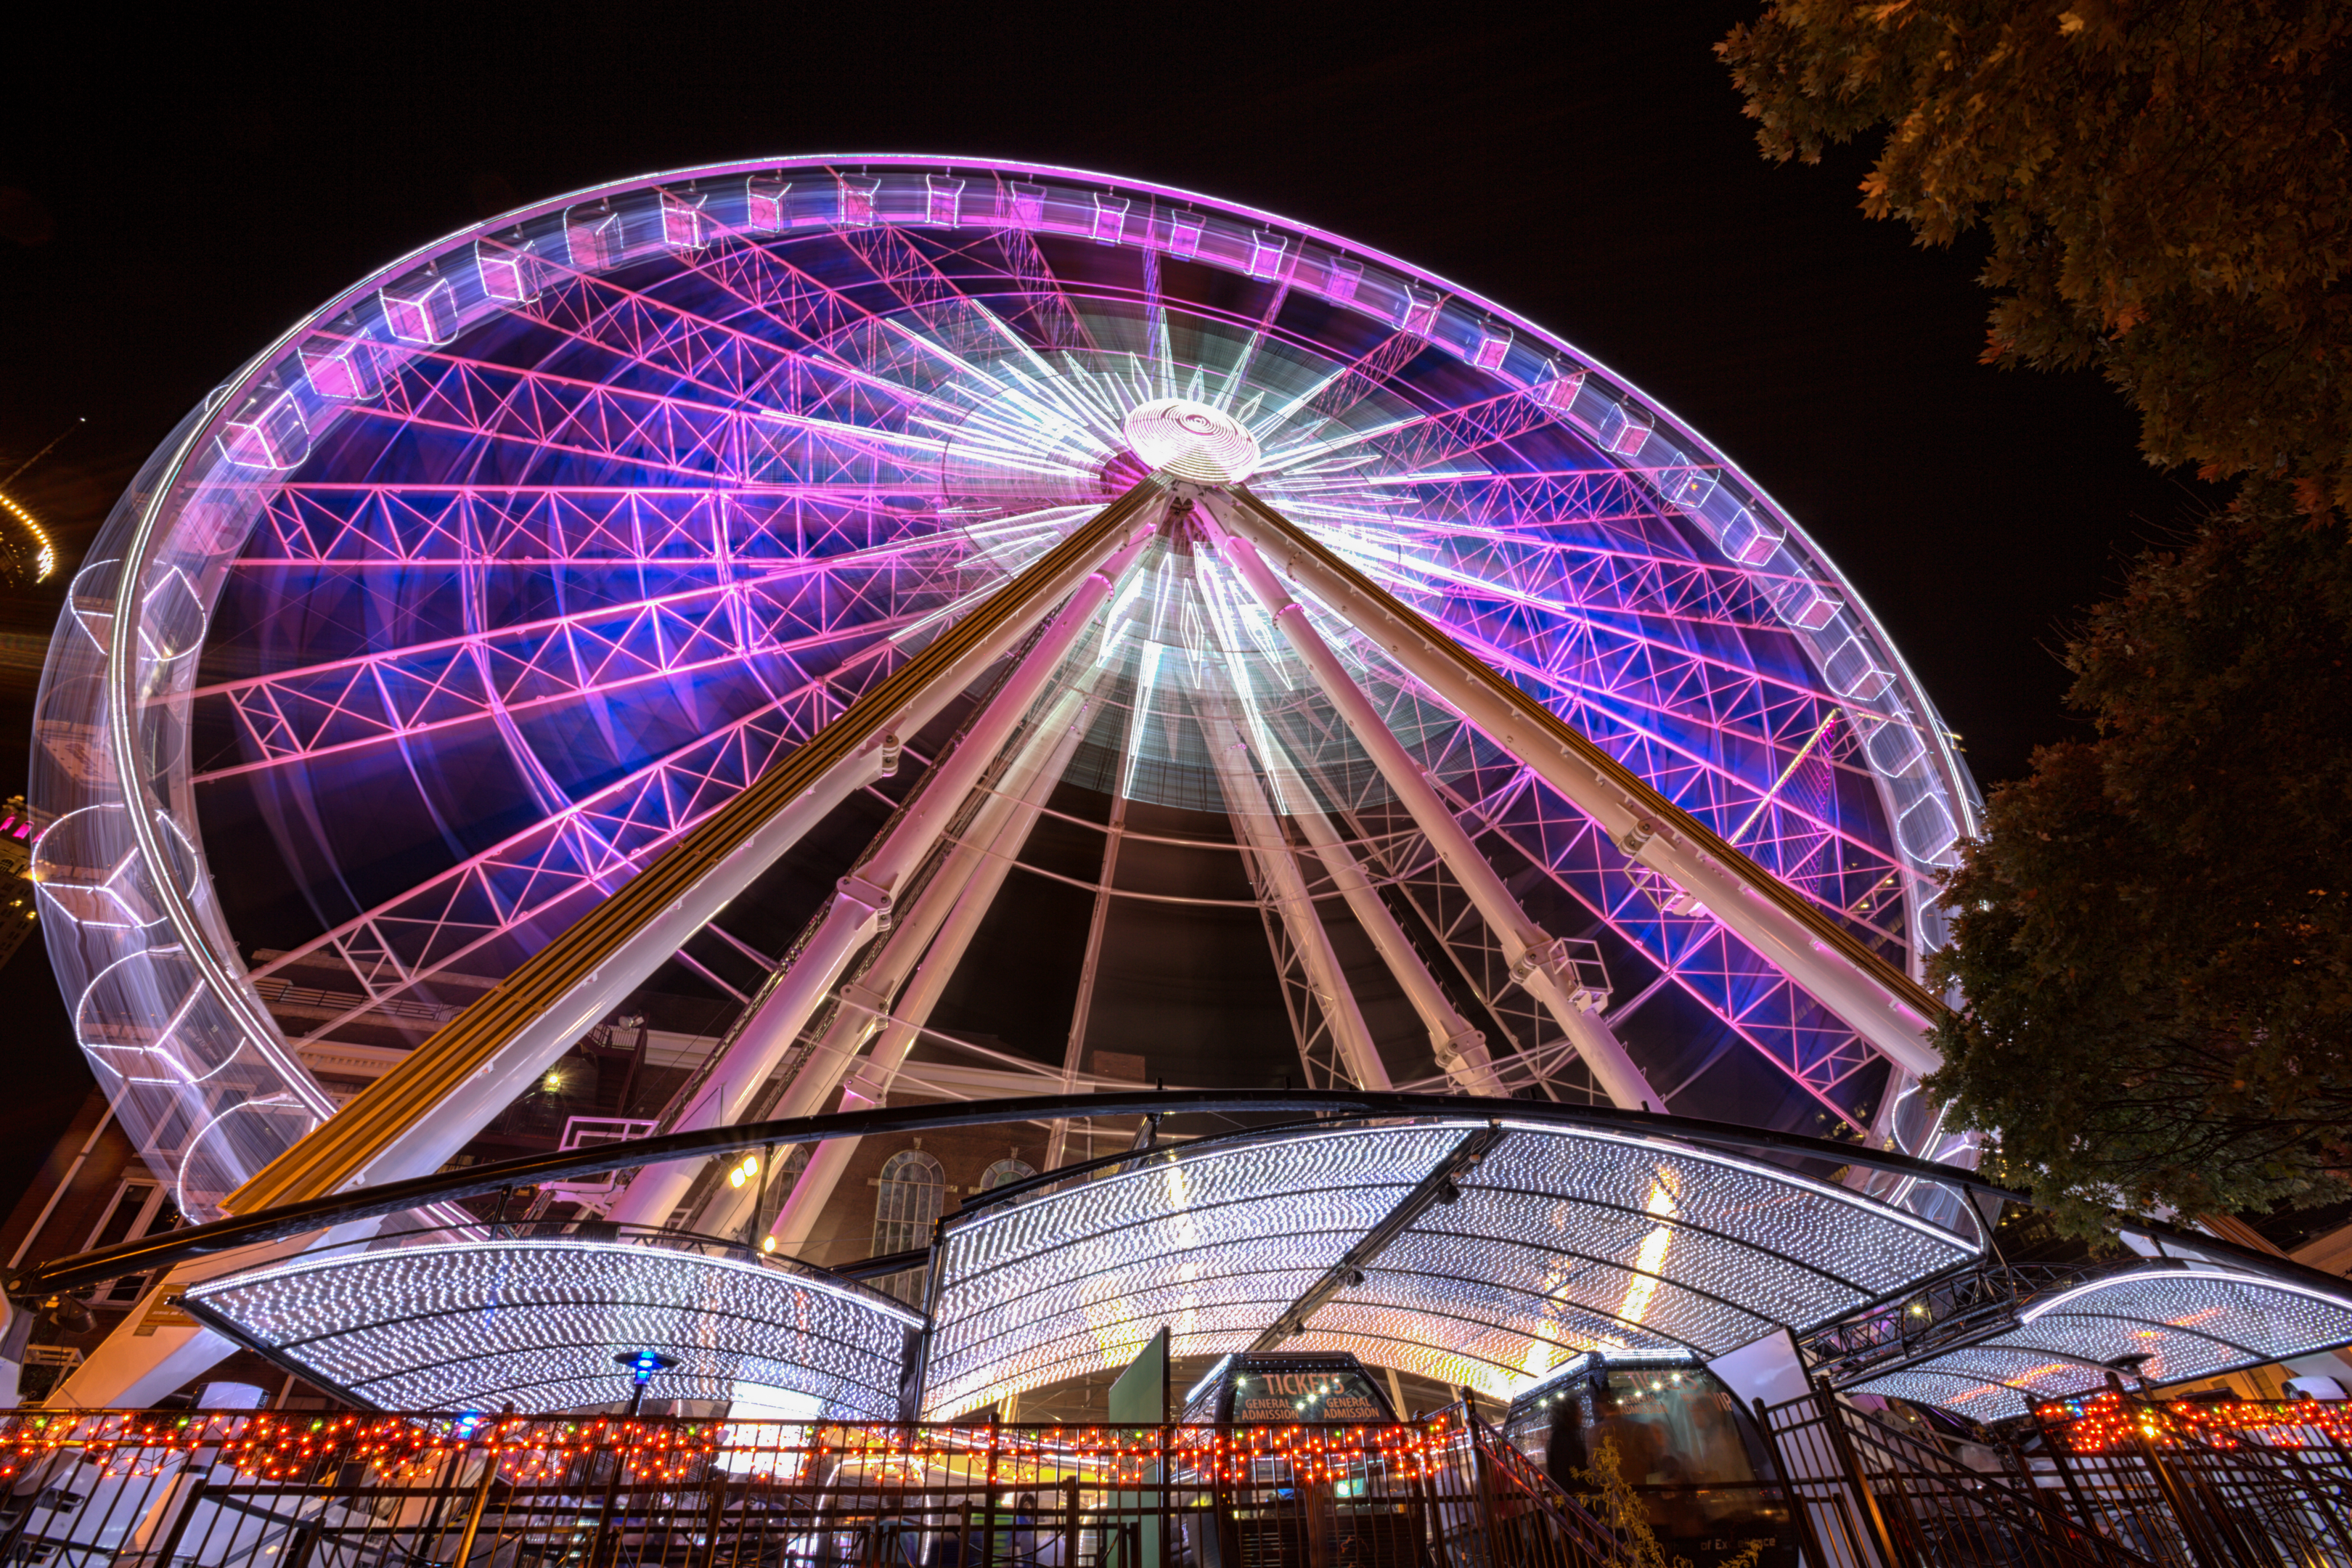 Blurred motion shot of a colorful ferris wheel at night